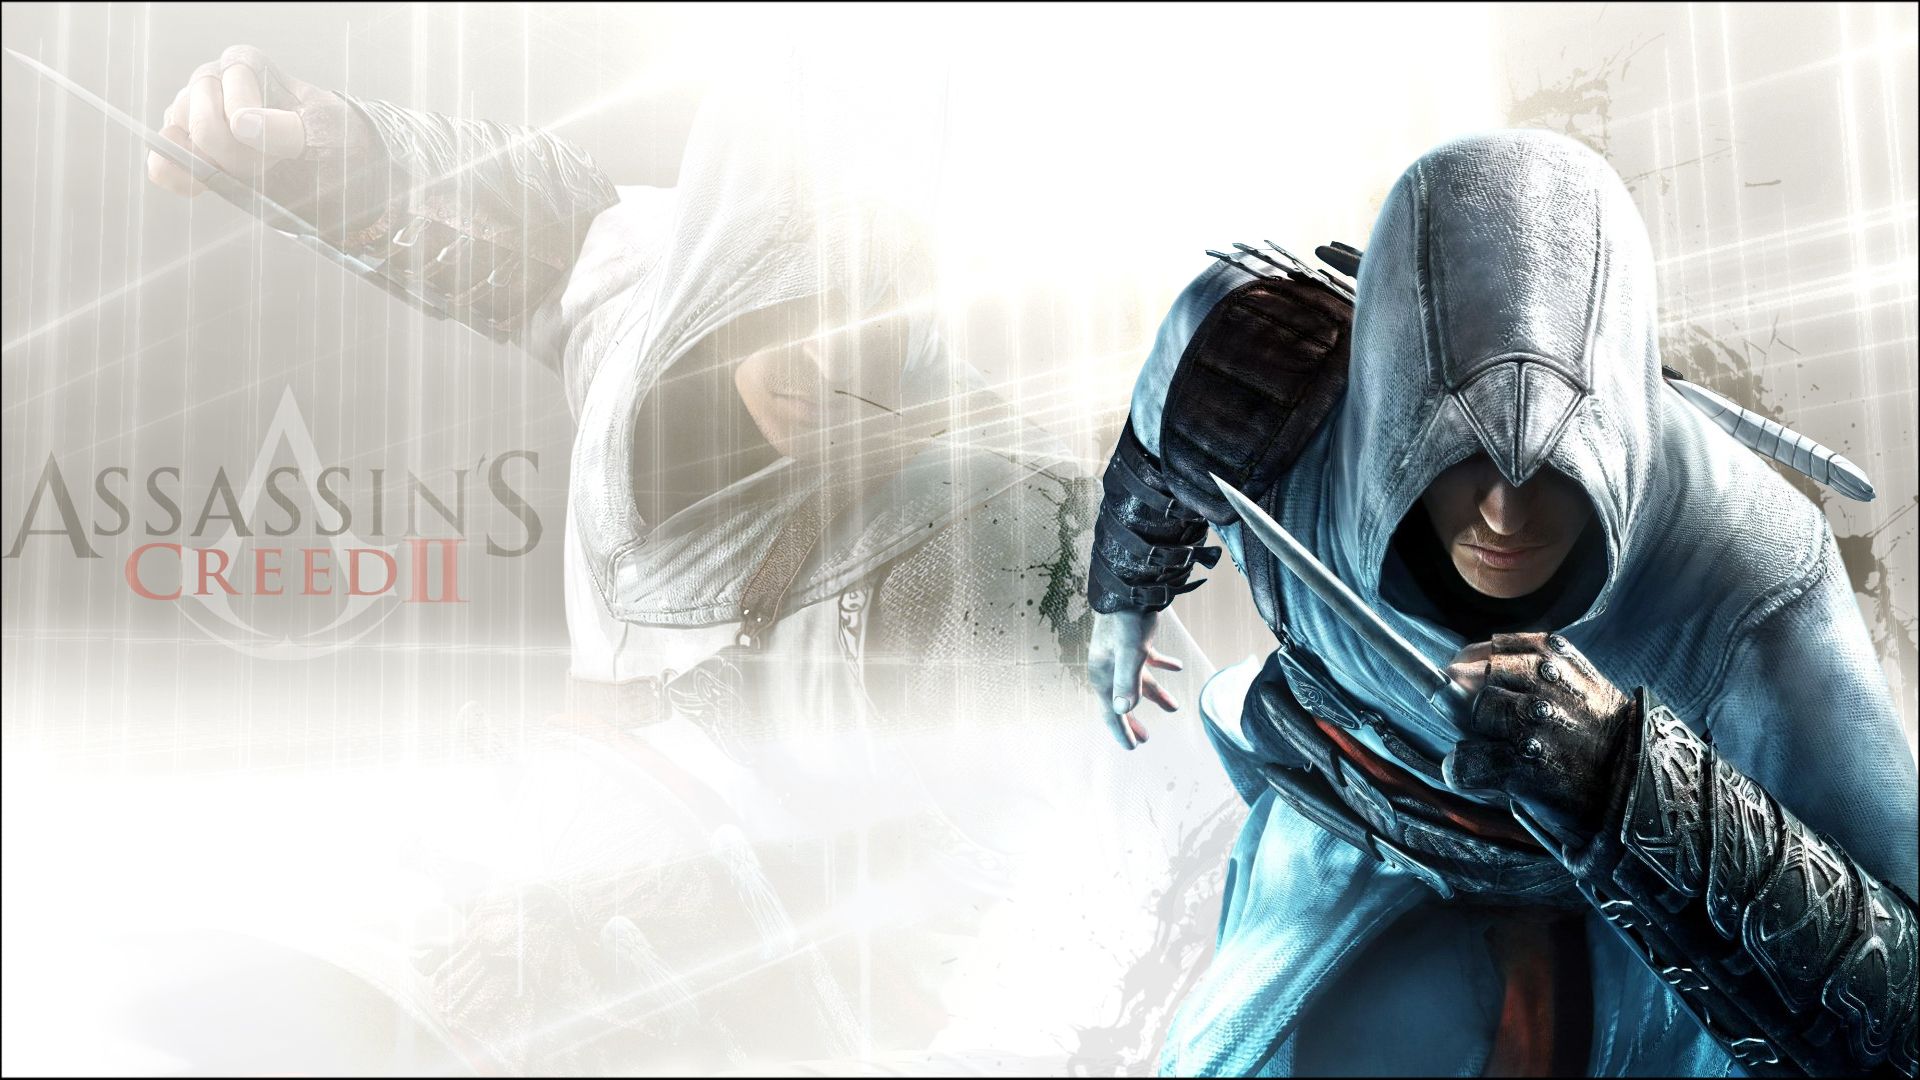 assassin's creed 3d wallpaper,action adventure game,pc game,shooter game,games,cg artwork